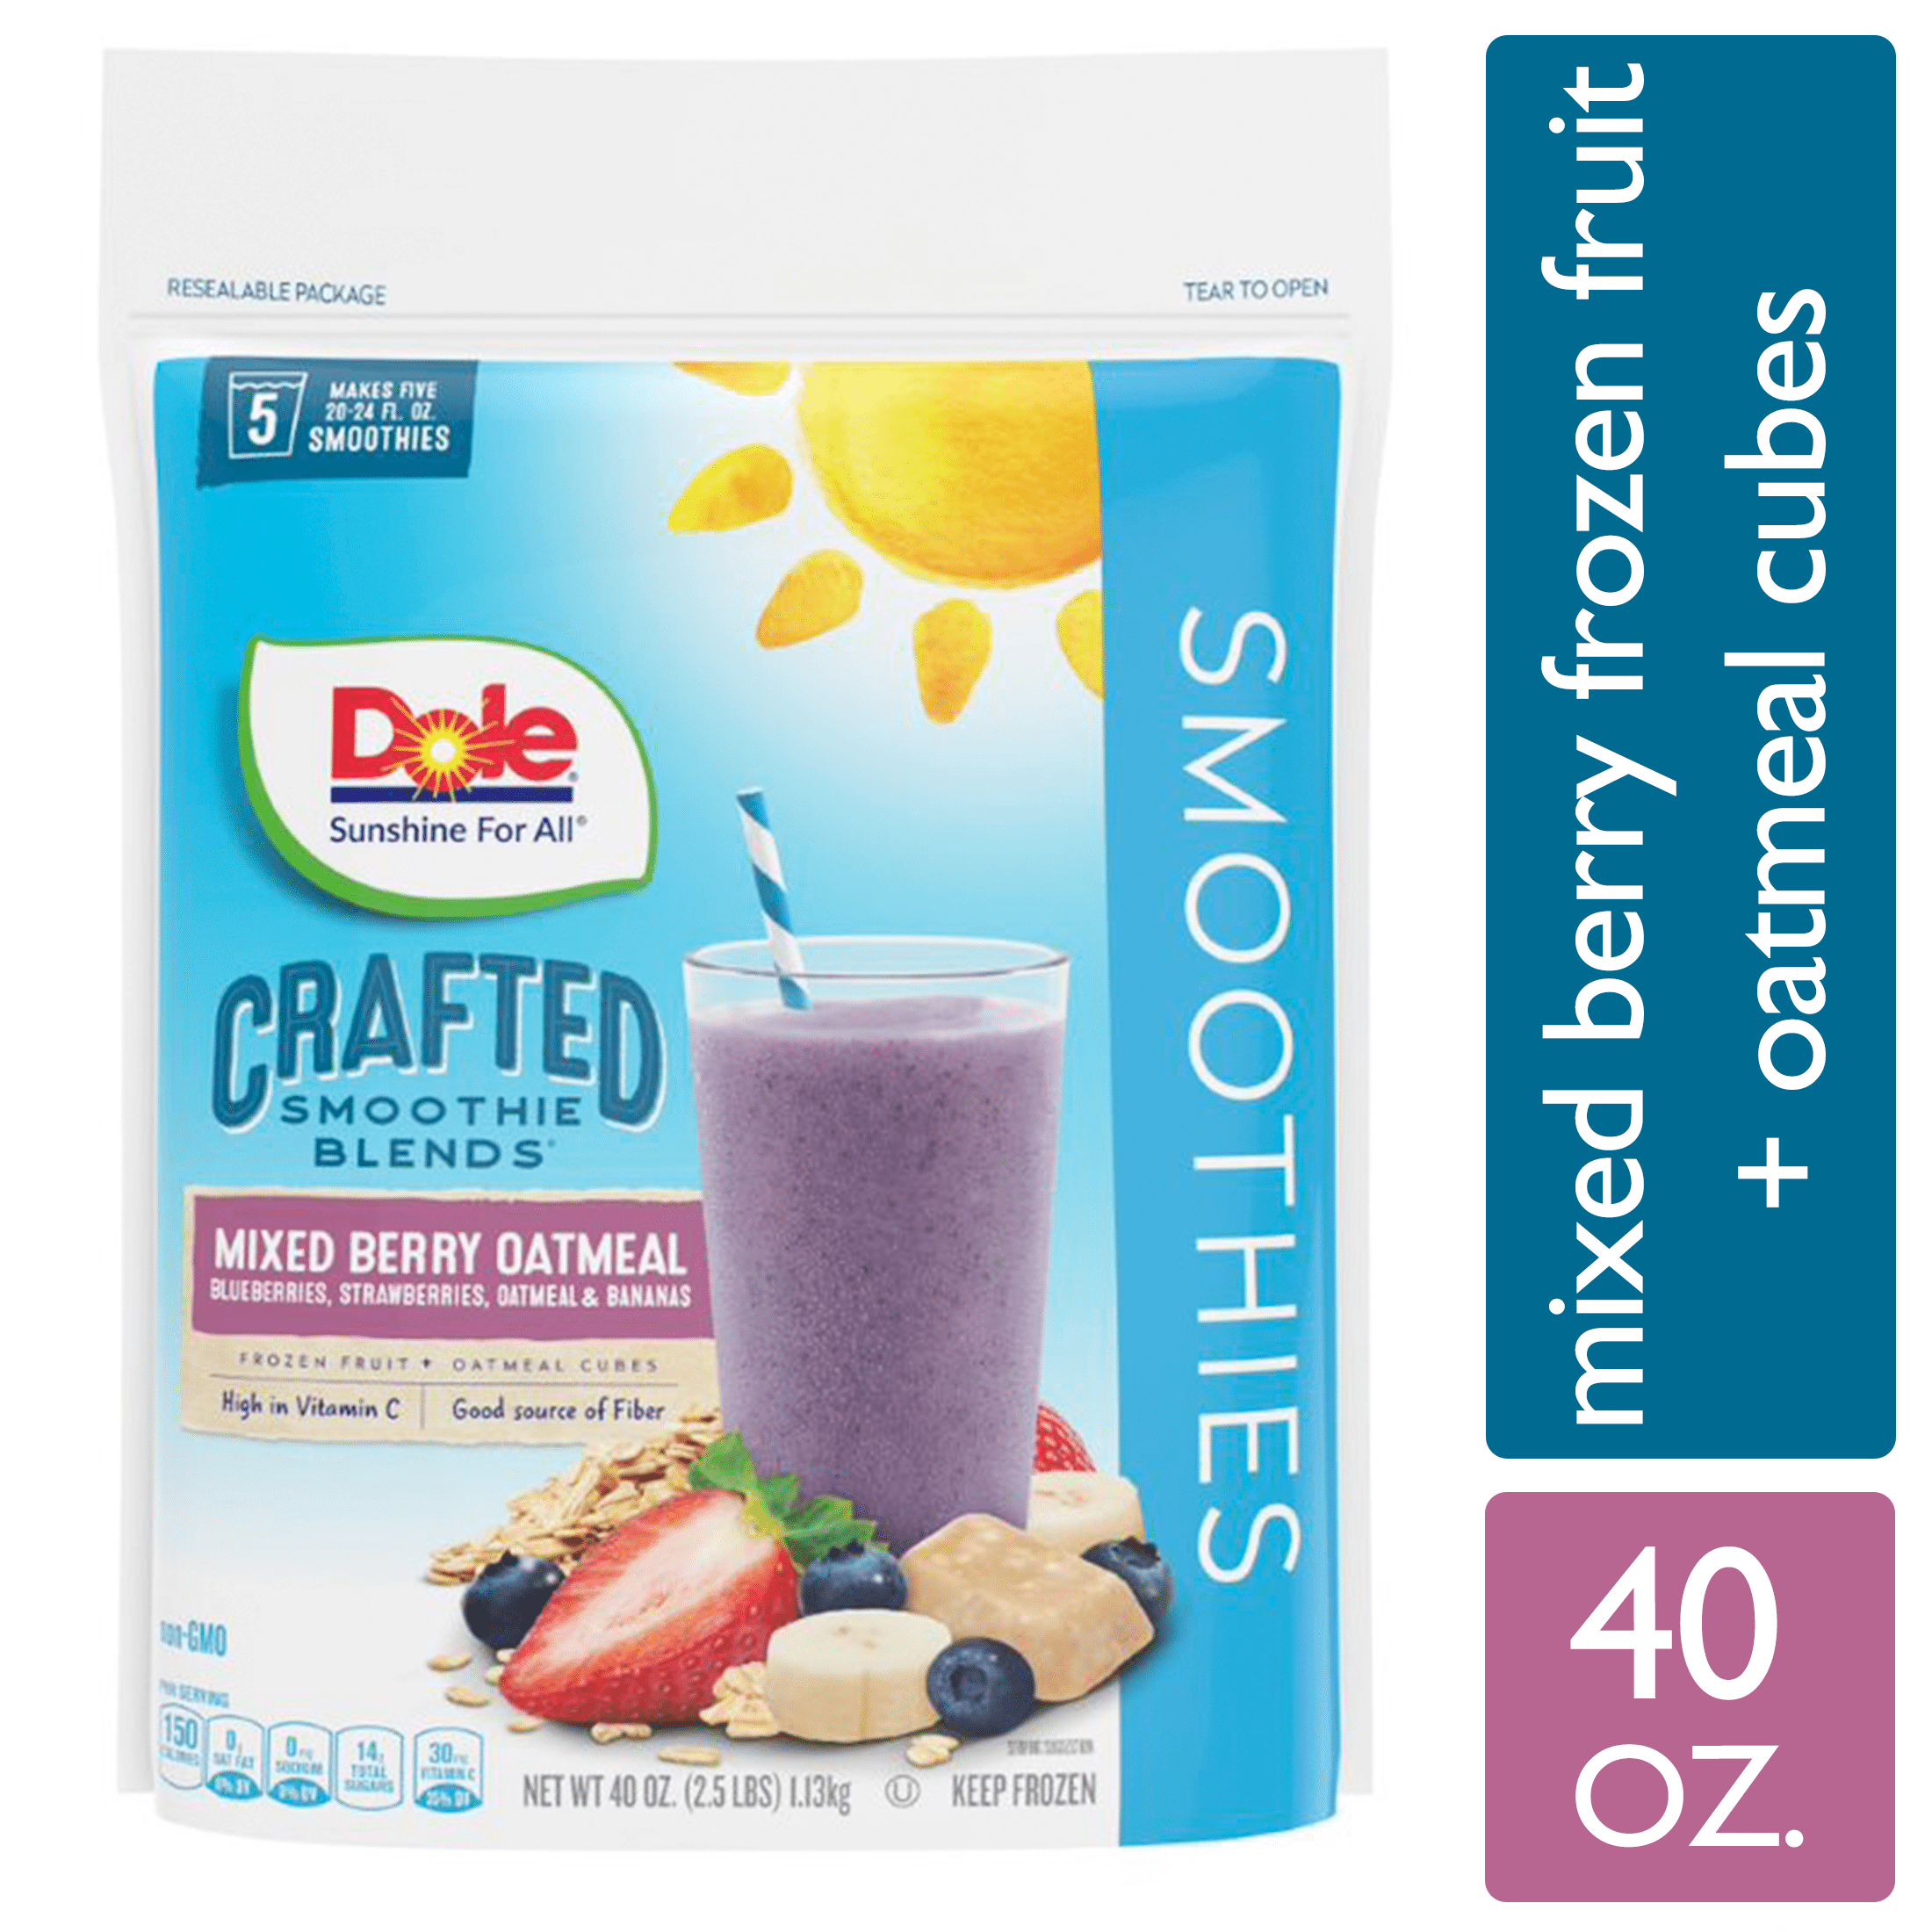 Dole Crafted Smoothie Blends Frozen Mixed Berry Oatmeal Blend, 40 oz